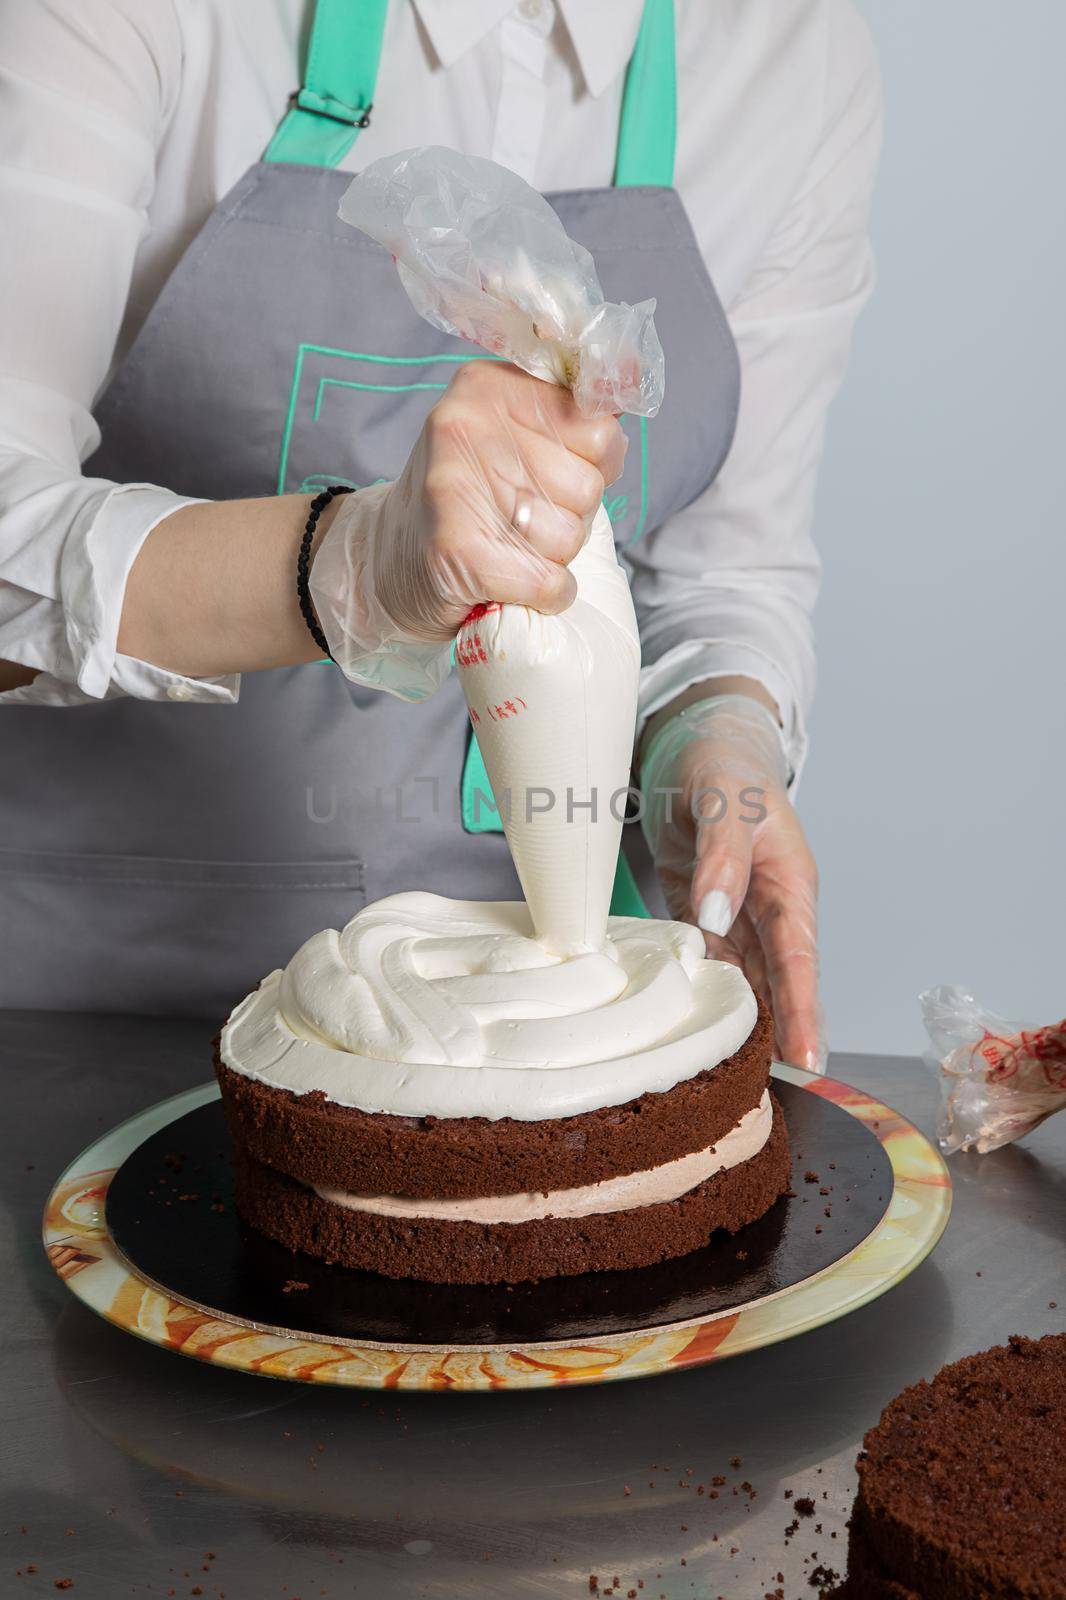 Woman hands chef spreading cream on second layer of Chocolate cake. Making Chocolate Layer Cake. Series.